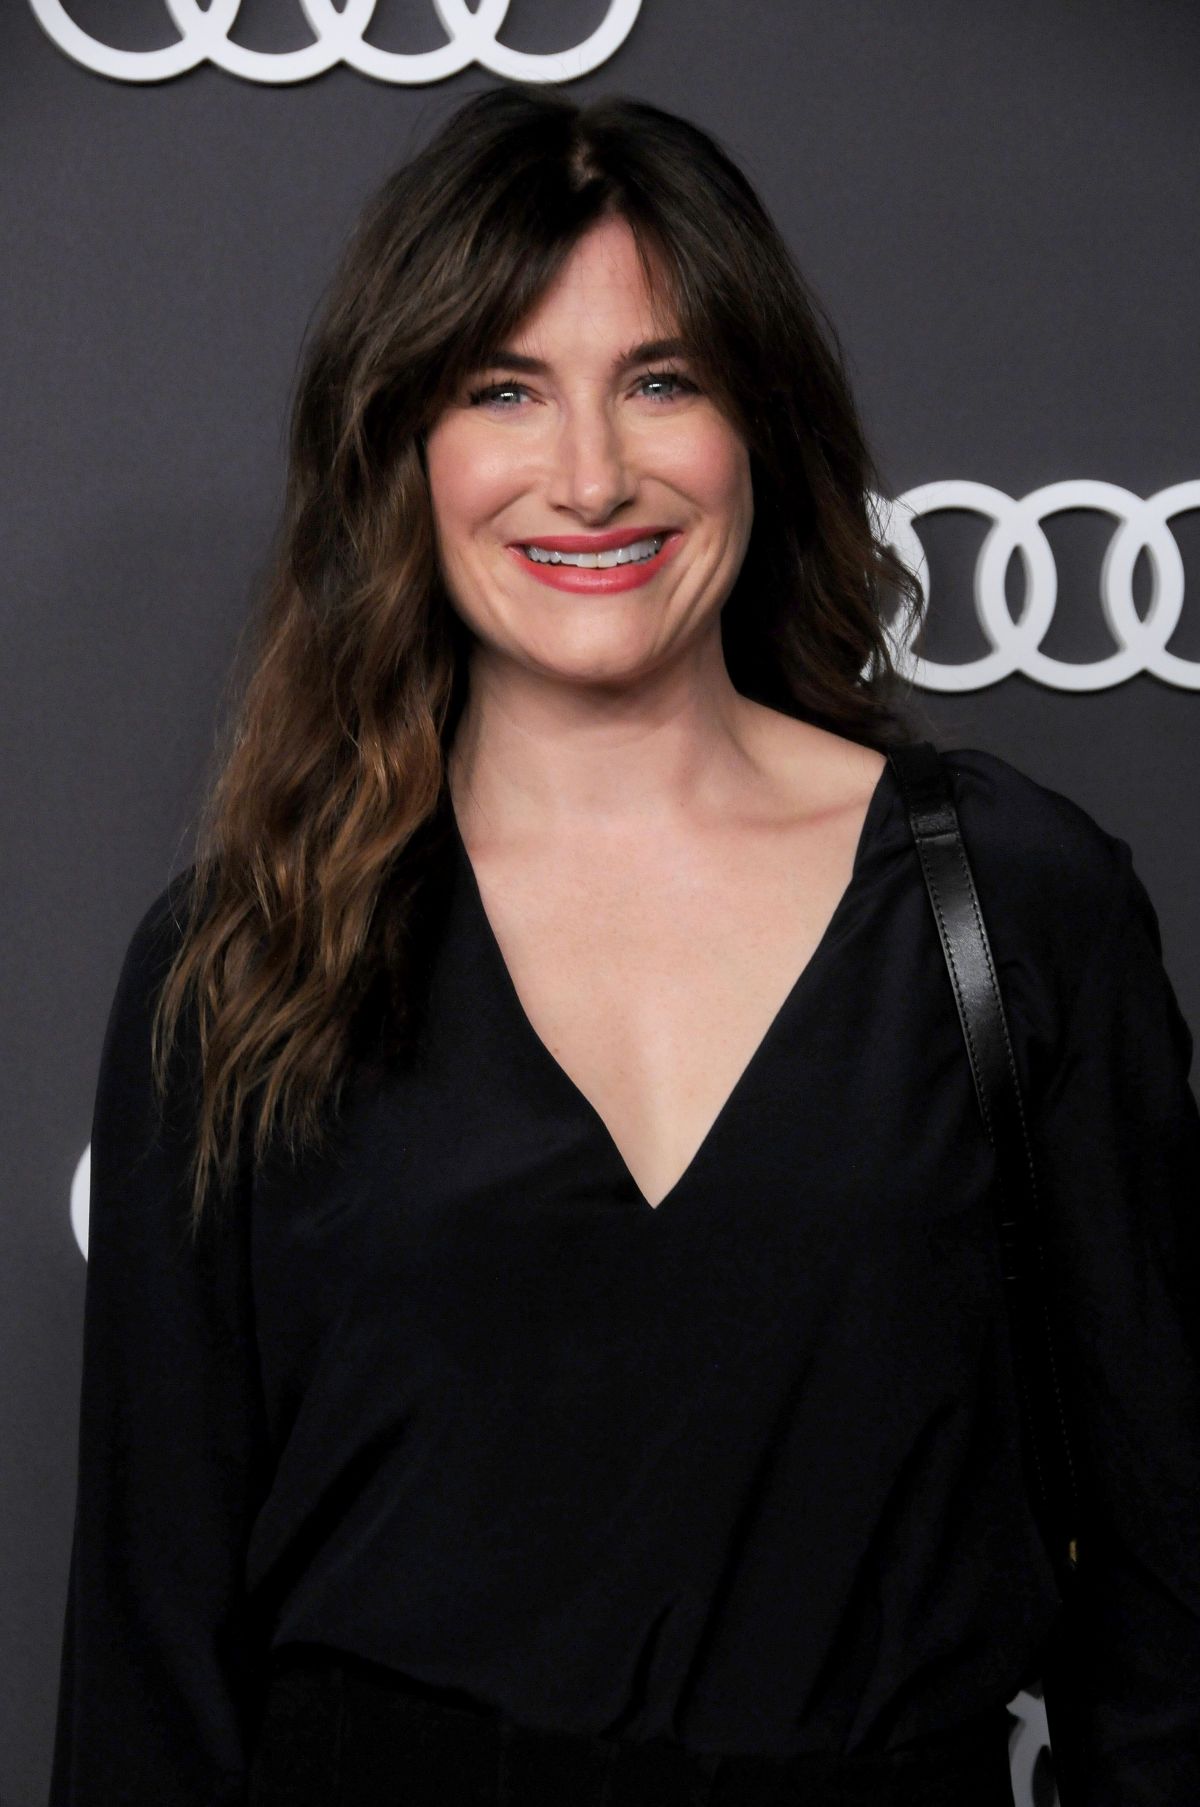 KATHRYN HAHN at Audi's Pre-emmy Party in Hollywood 09/14 ...